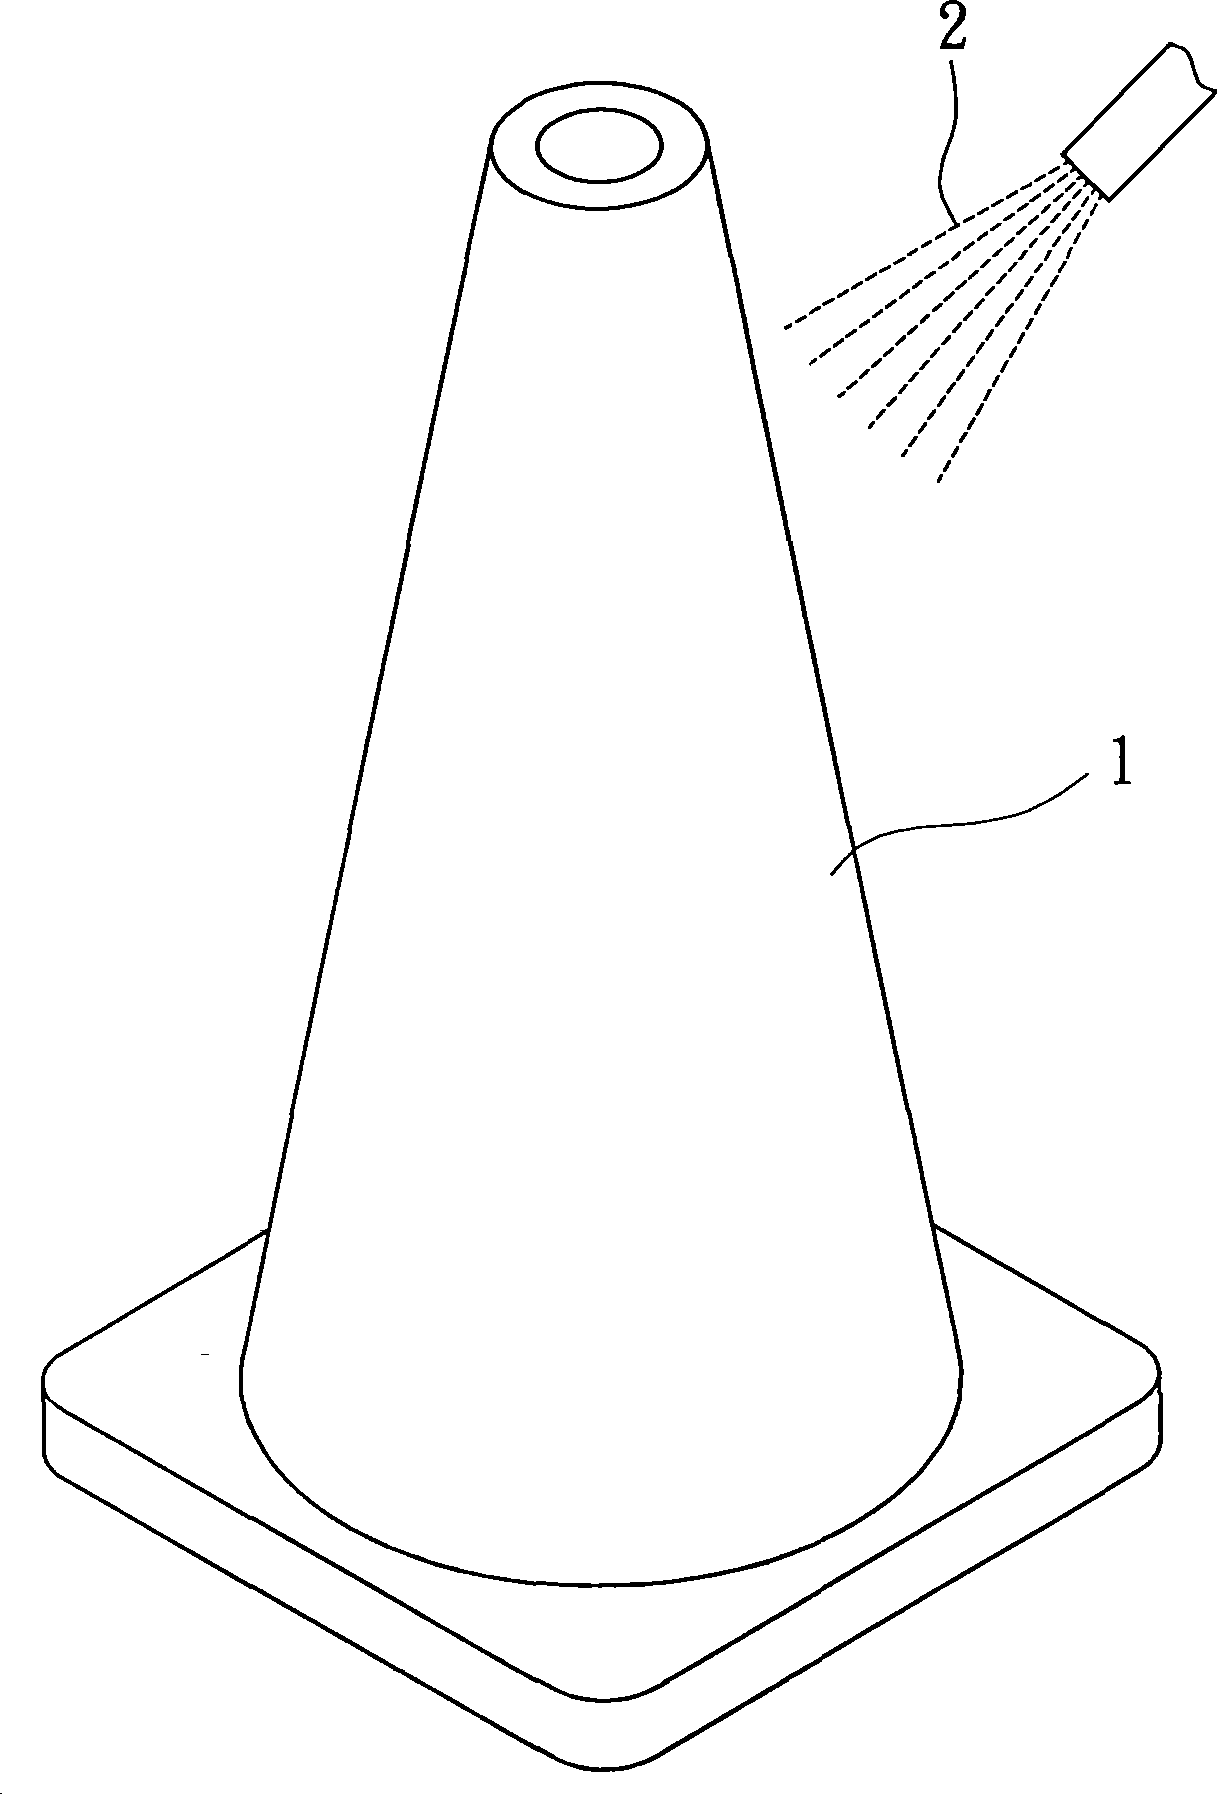 Method for producing safe cone using recycled material